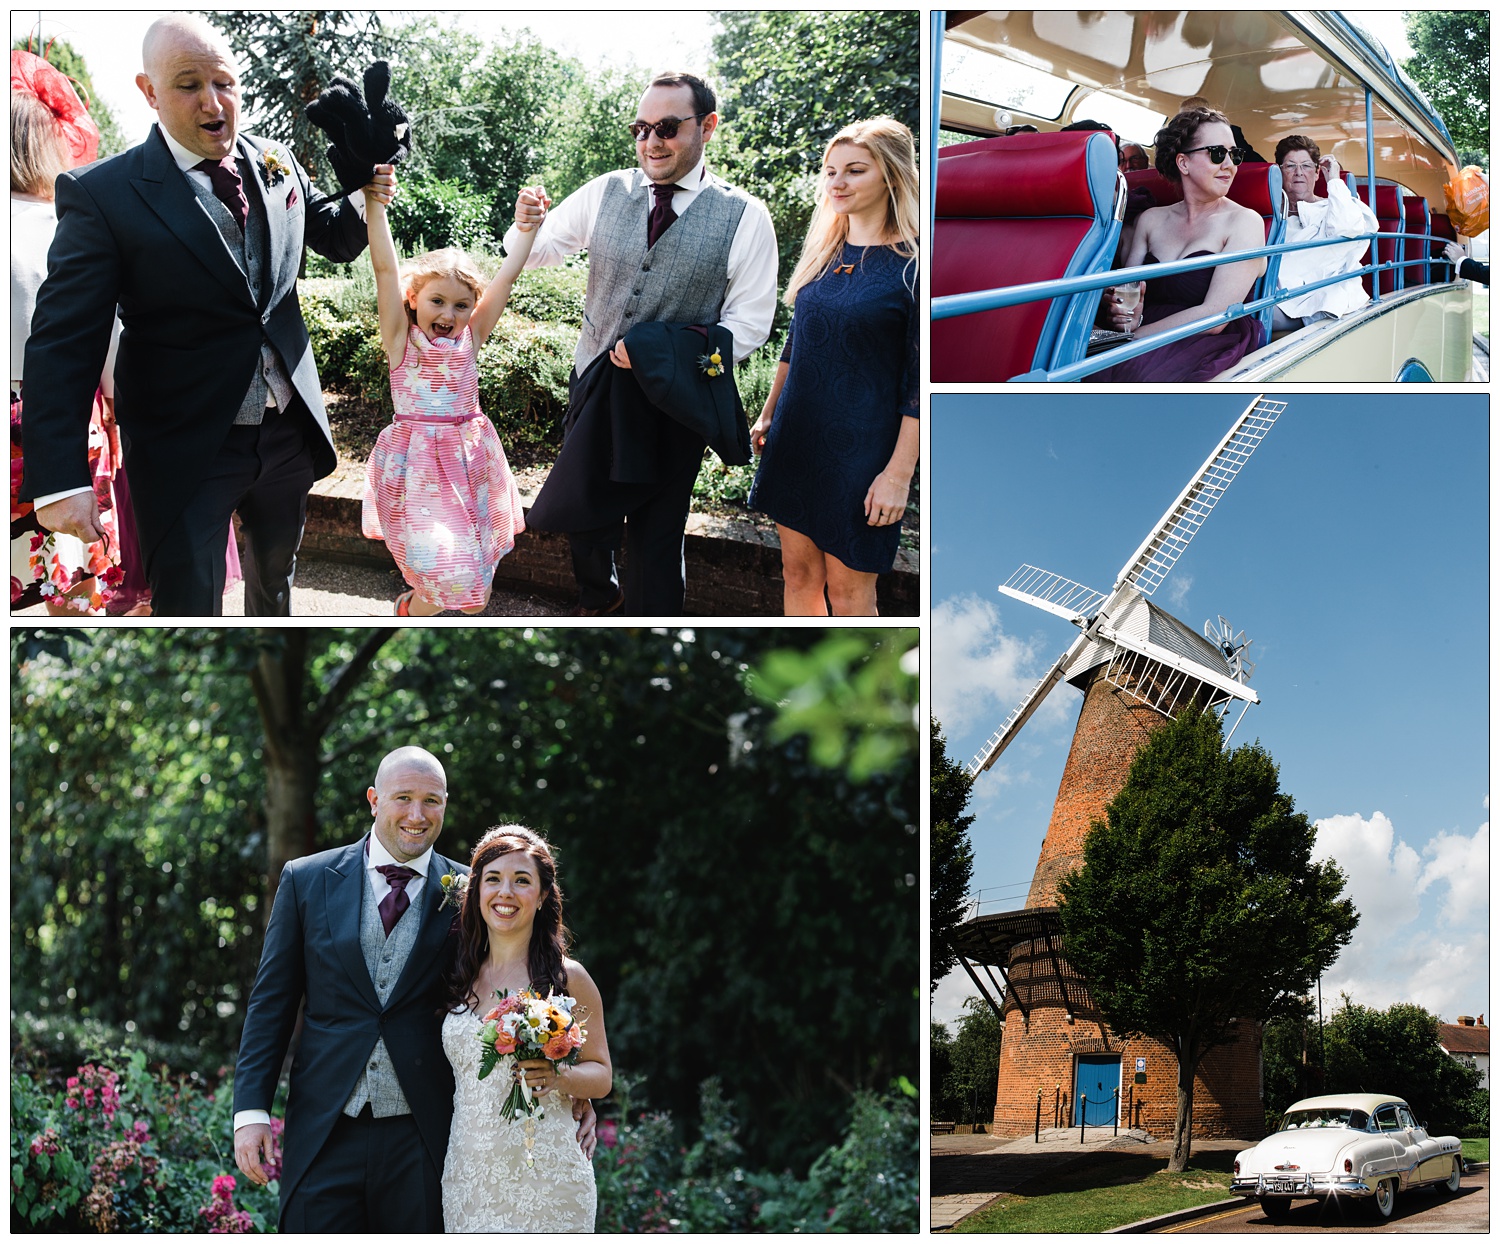 The Rayleigh Windmill and a couple who just got married.